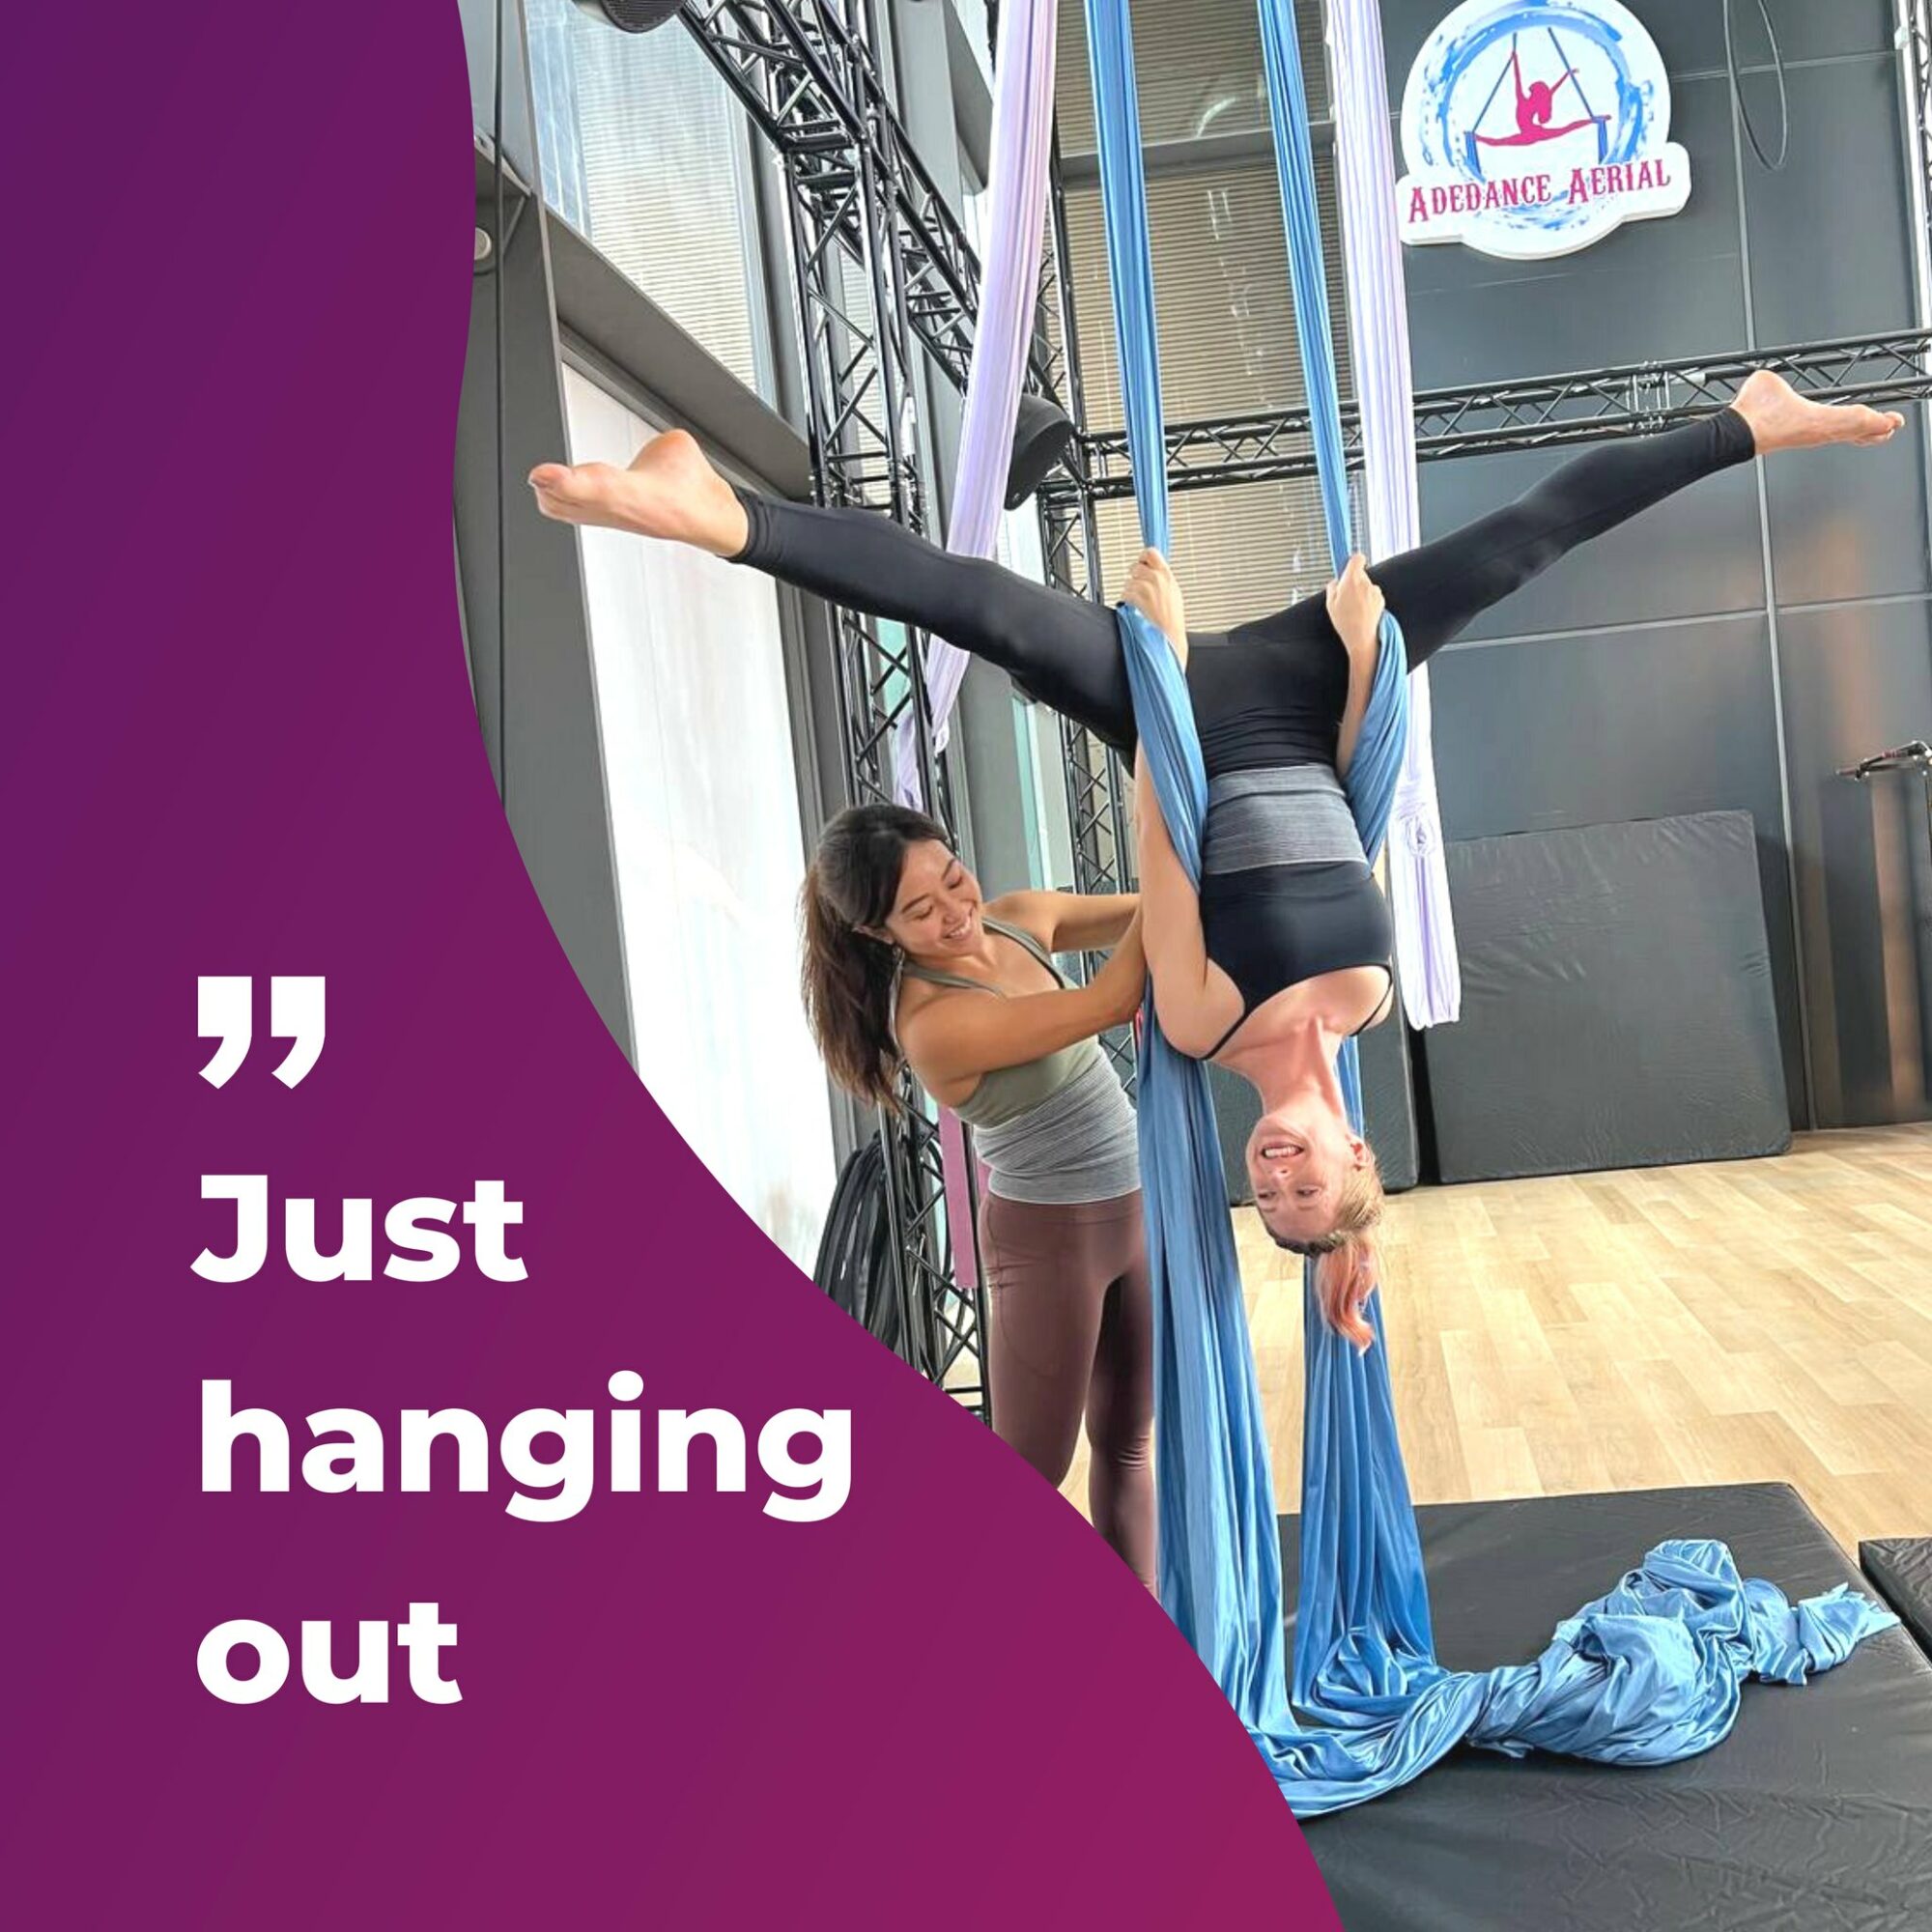 10 Of The Best Aerial Yoga Classes In Singapore For Beginners